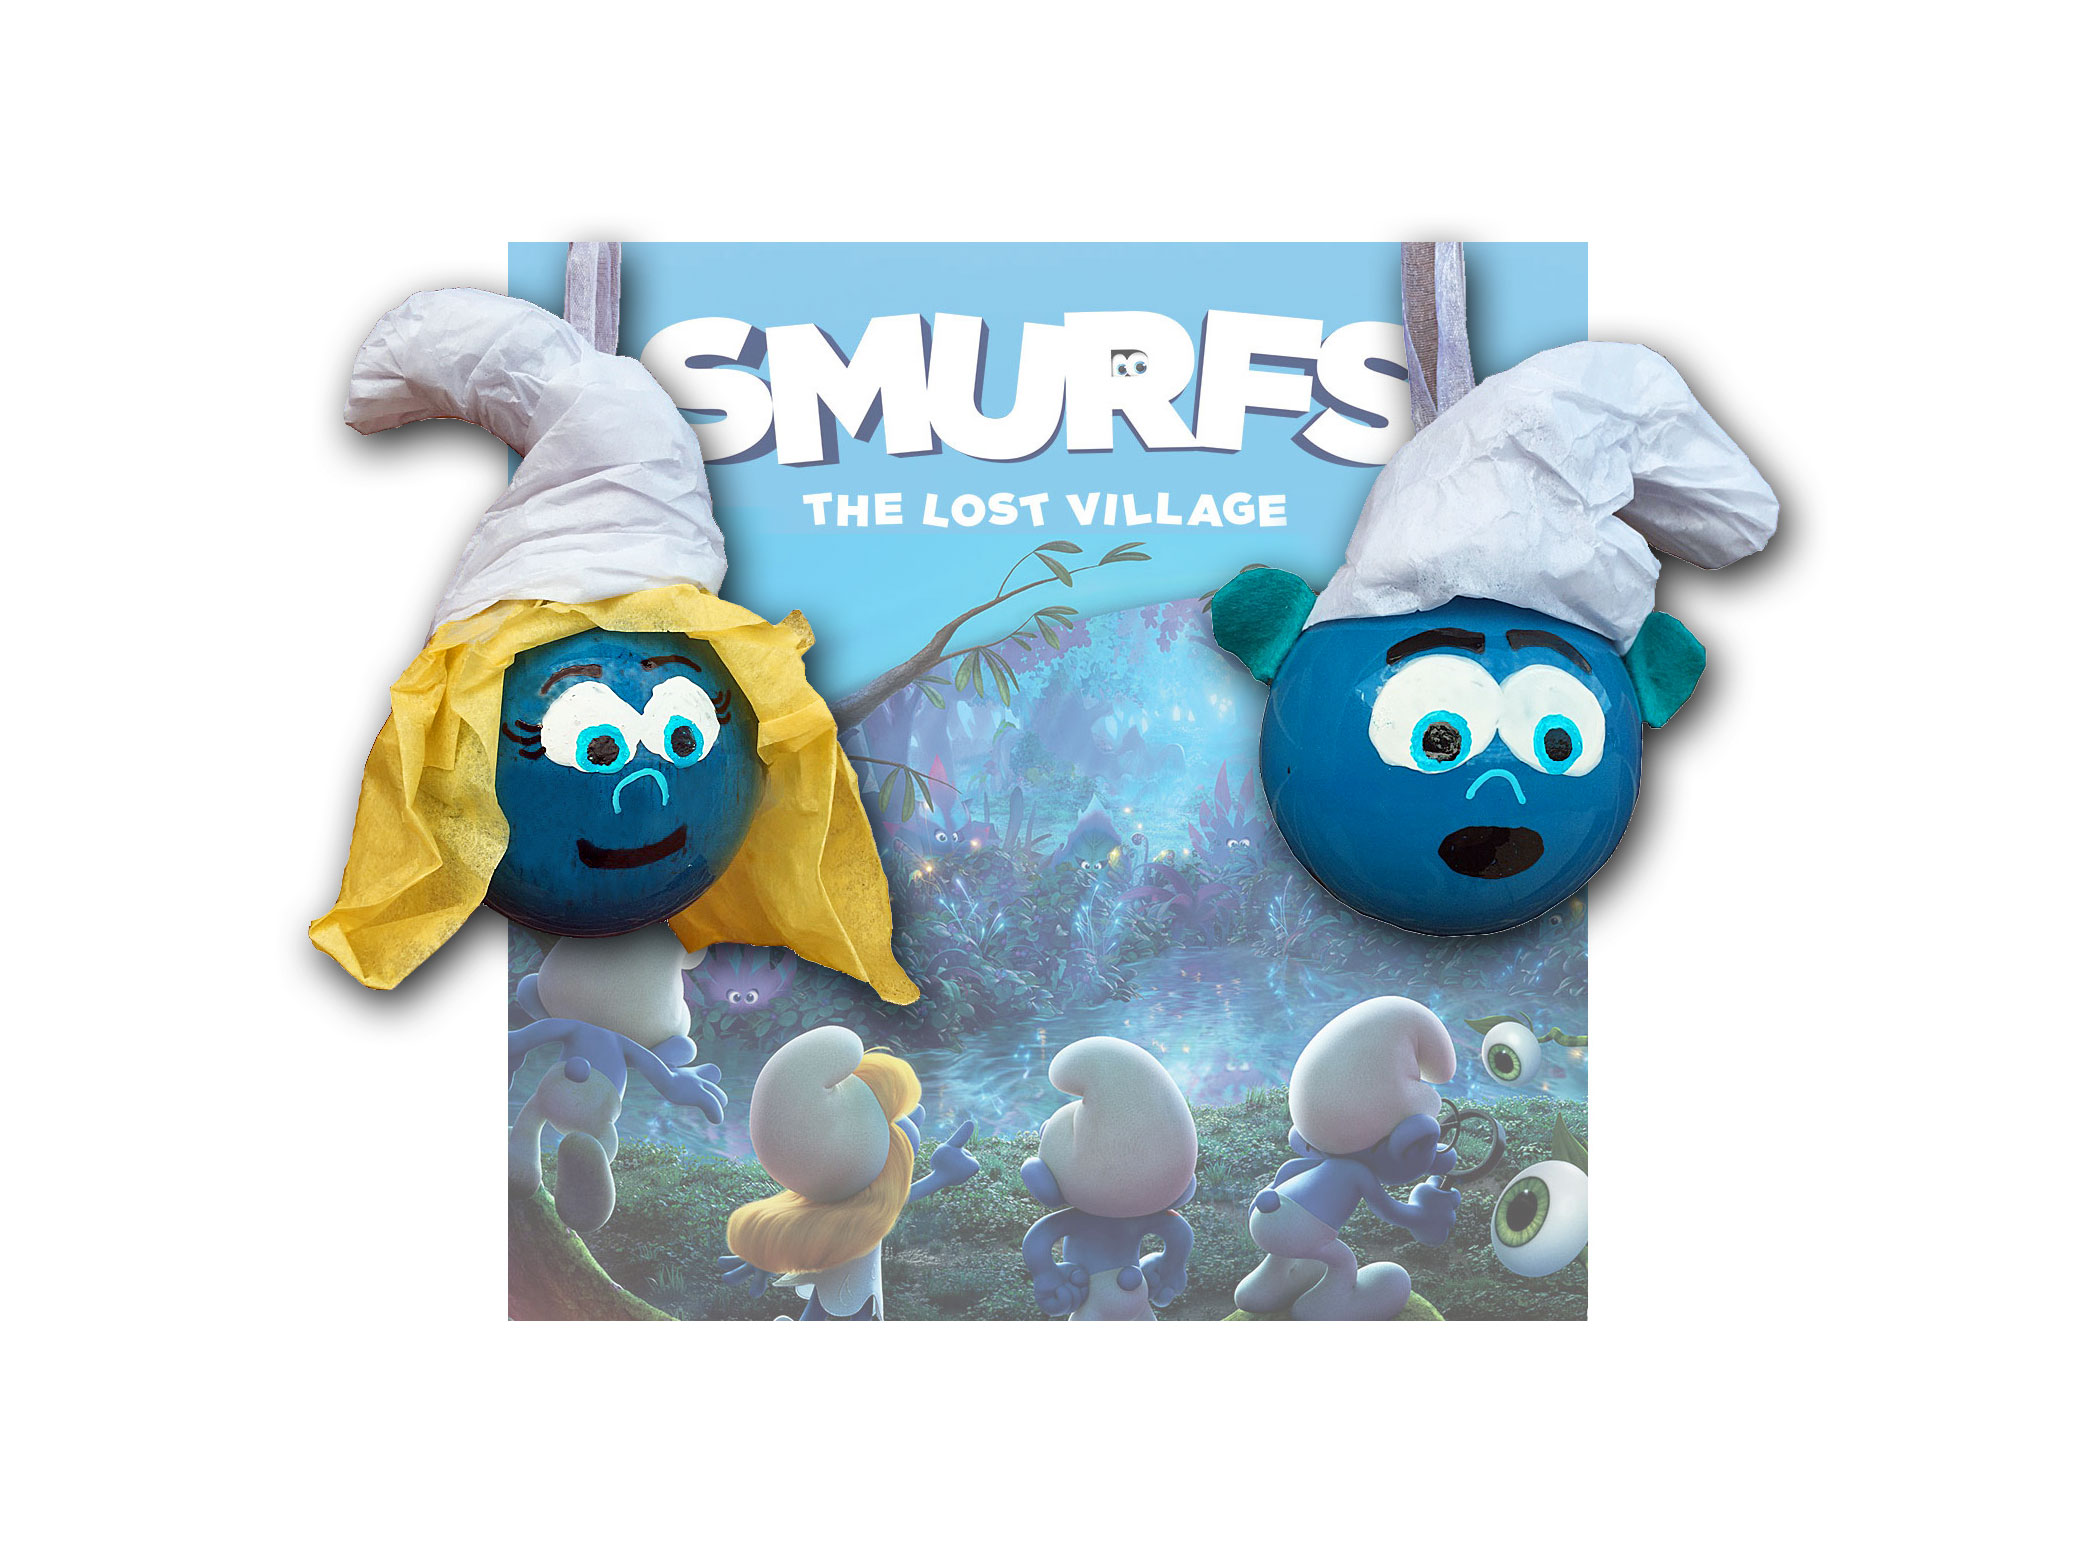 DIY Smurfs ornaments hanging from Smurfs book | Ornament Shop